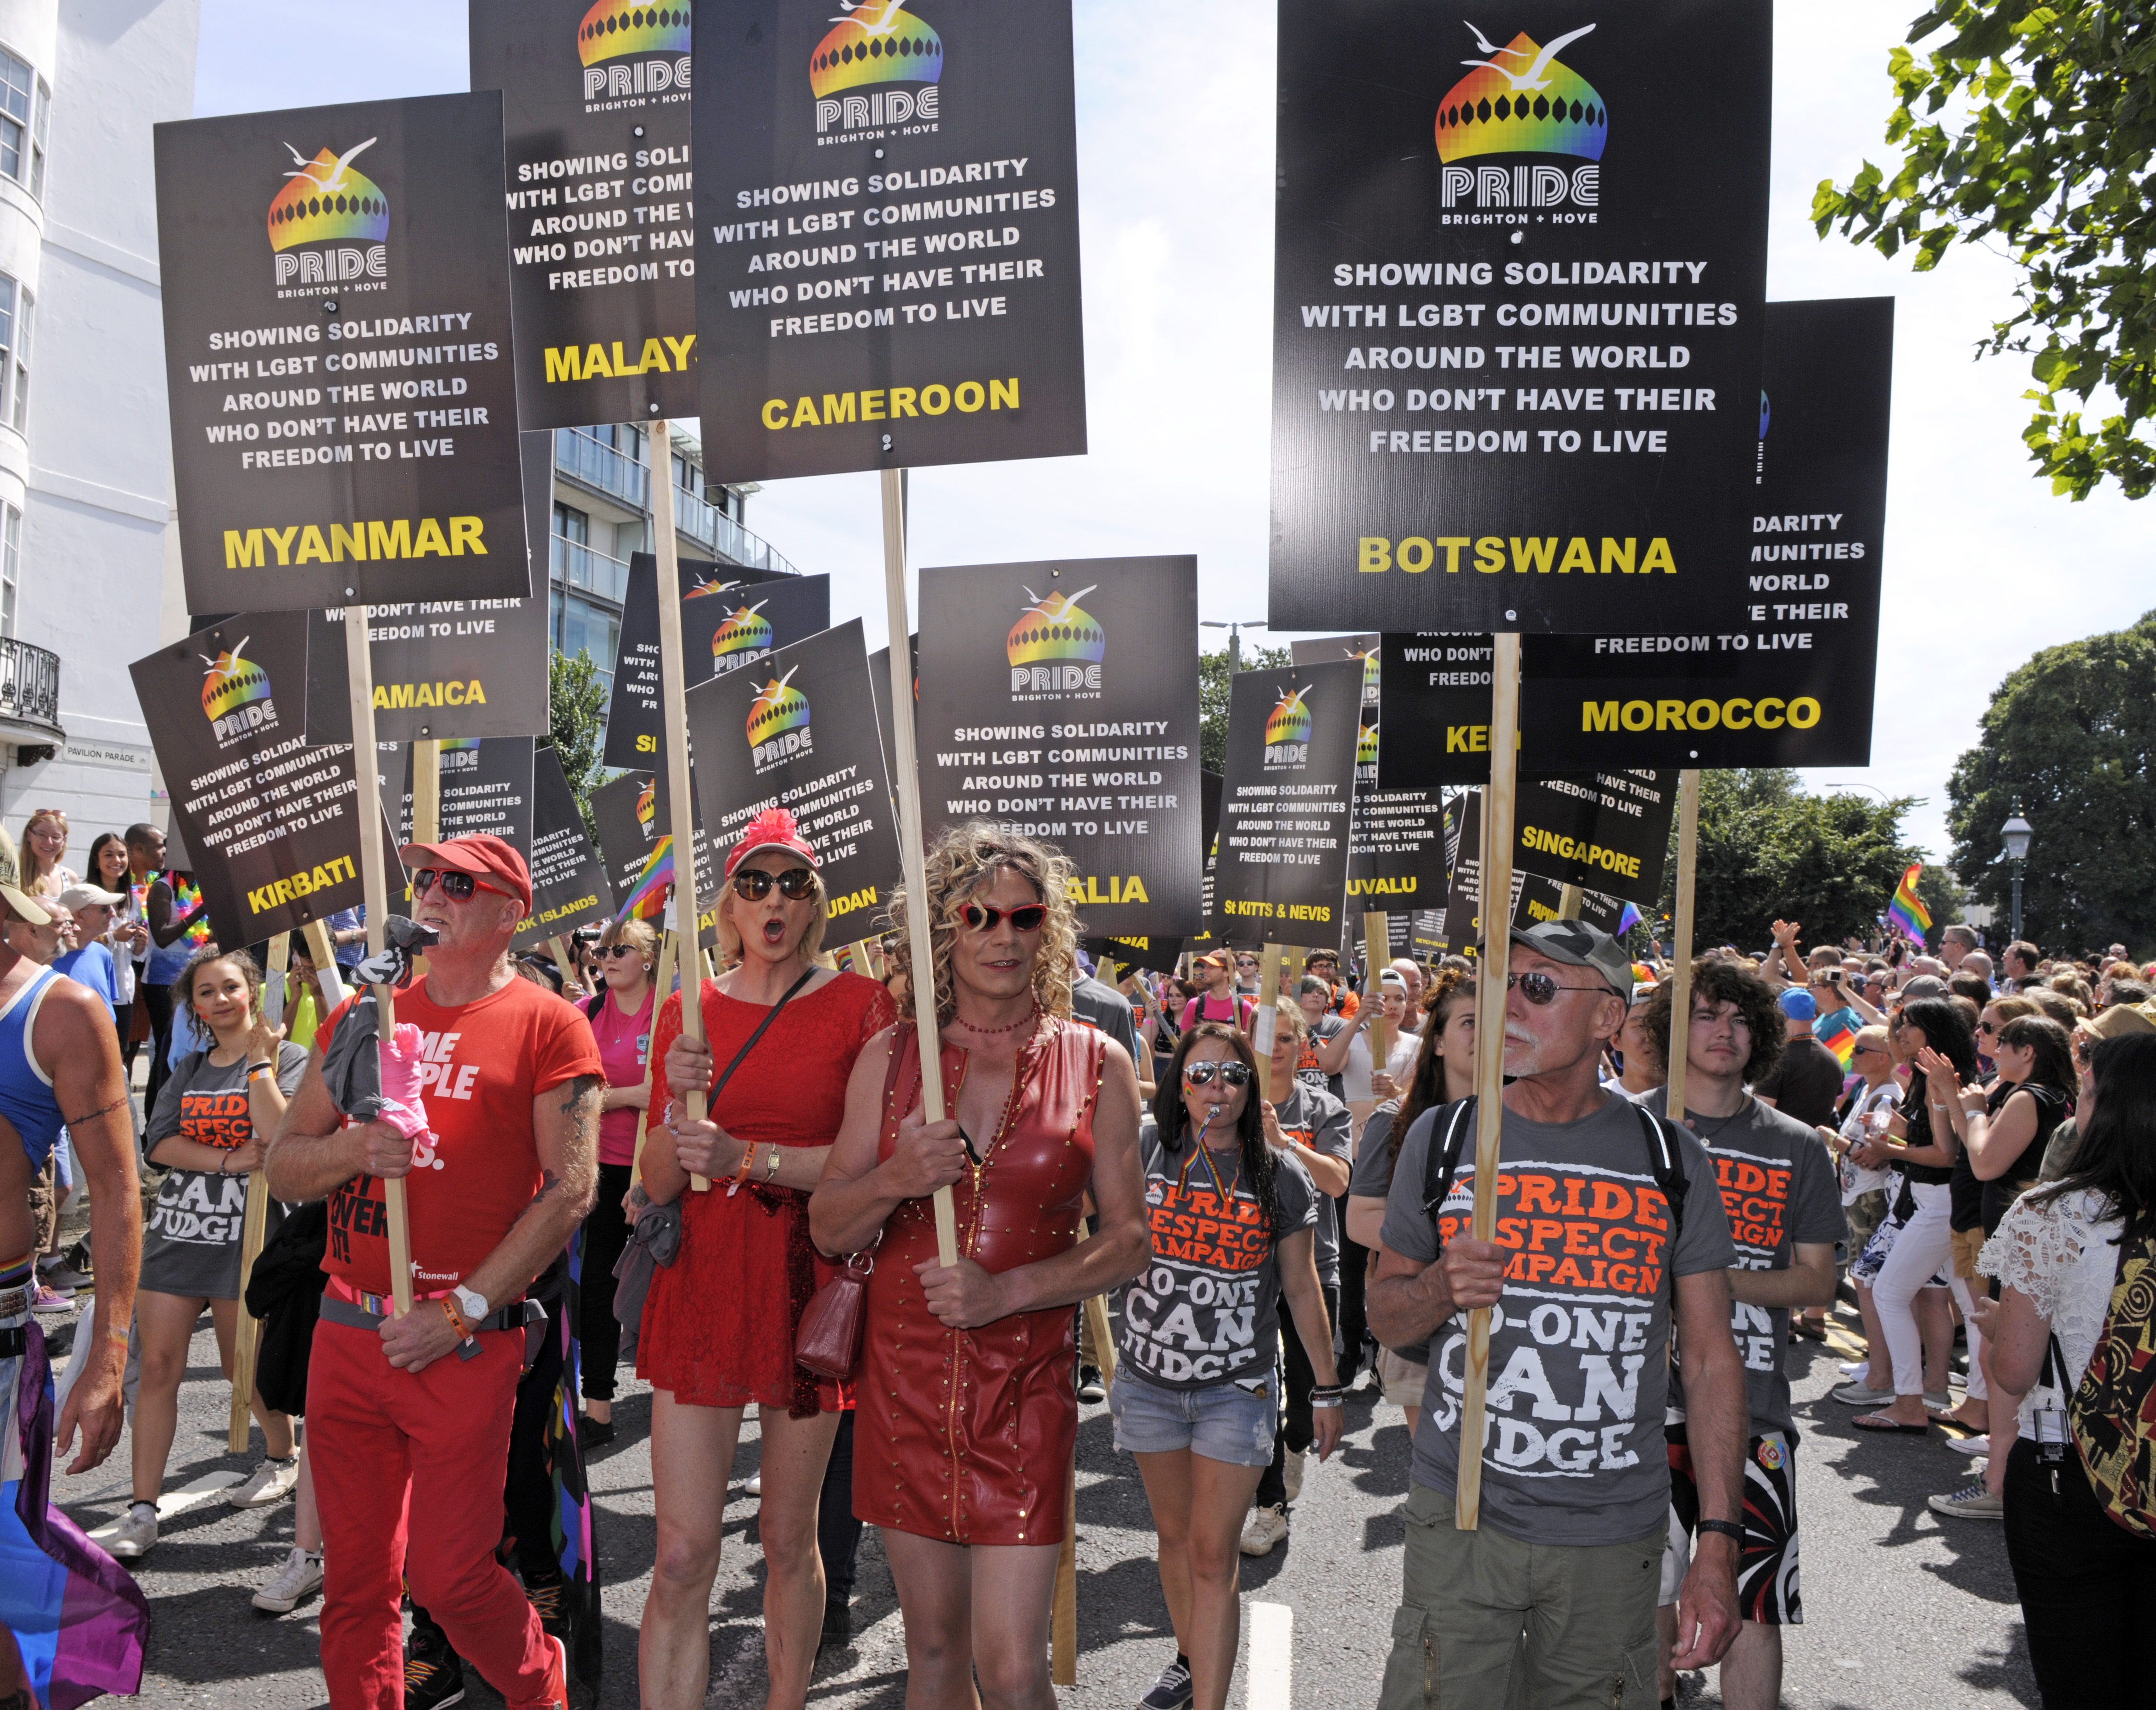 Pride Campaigning to highlight global LGBT communities